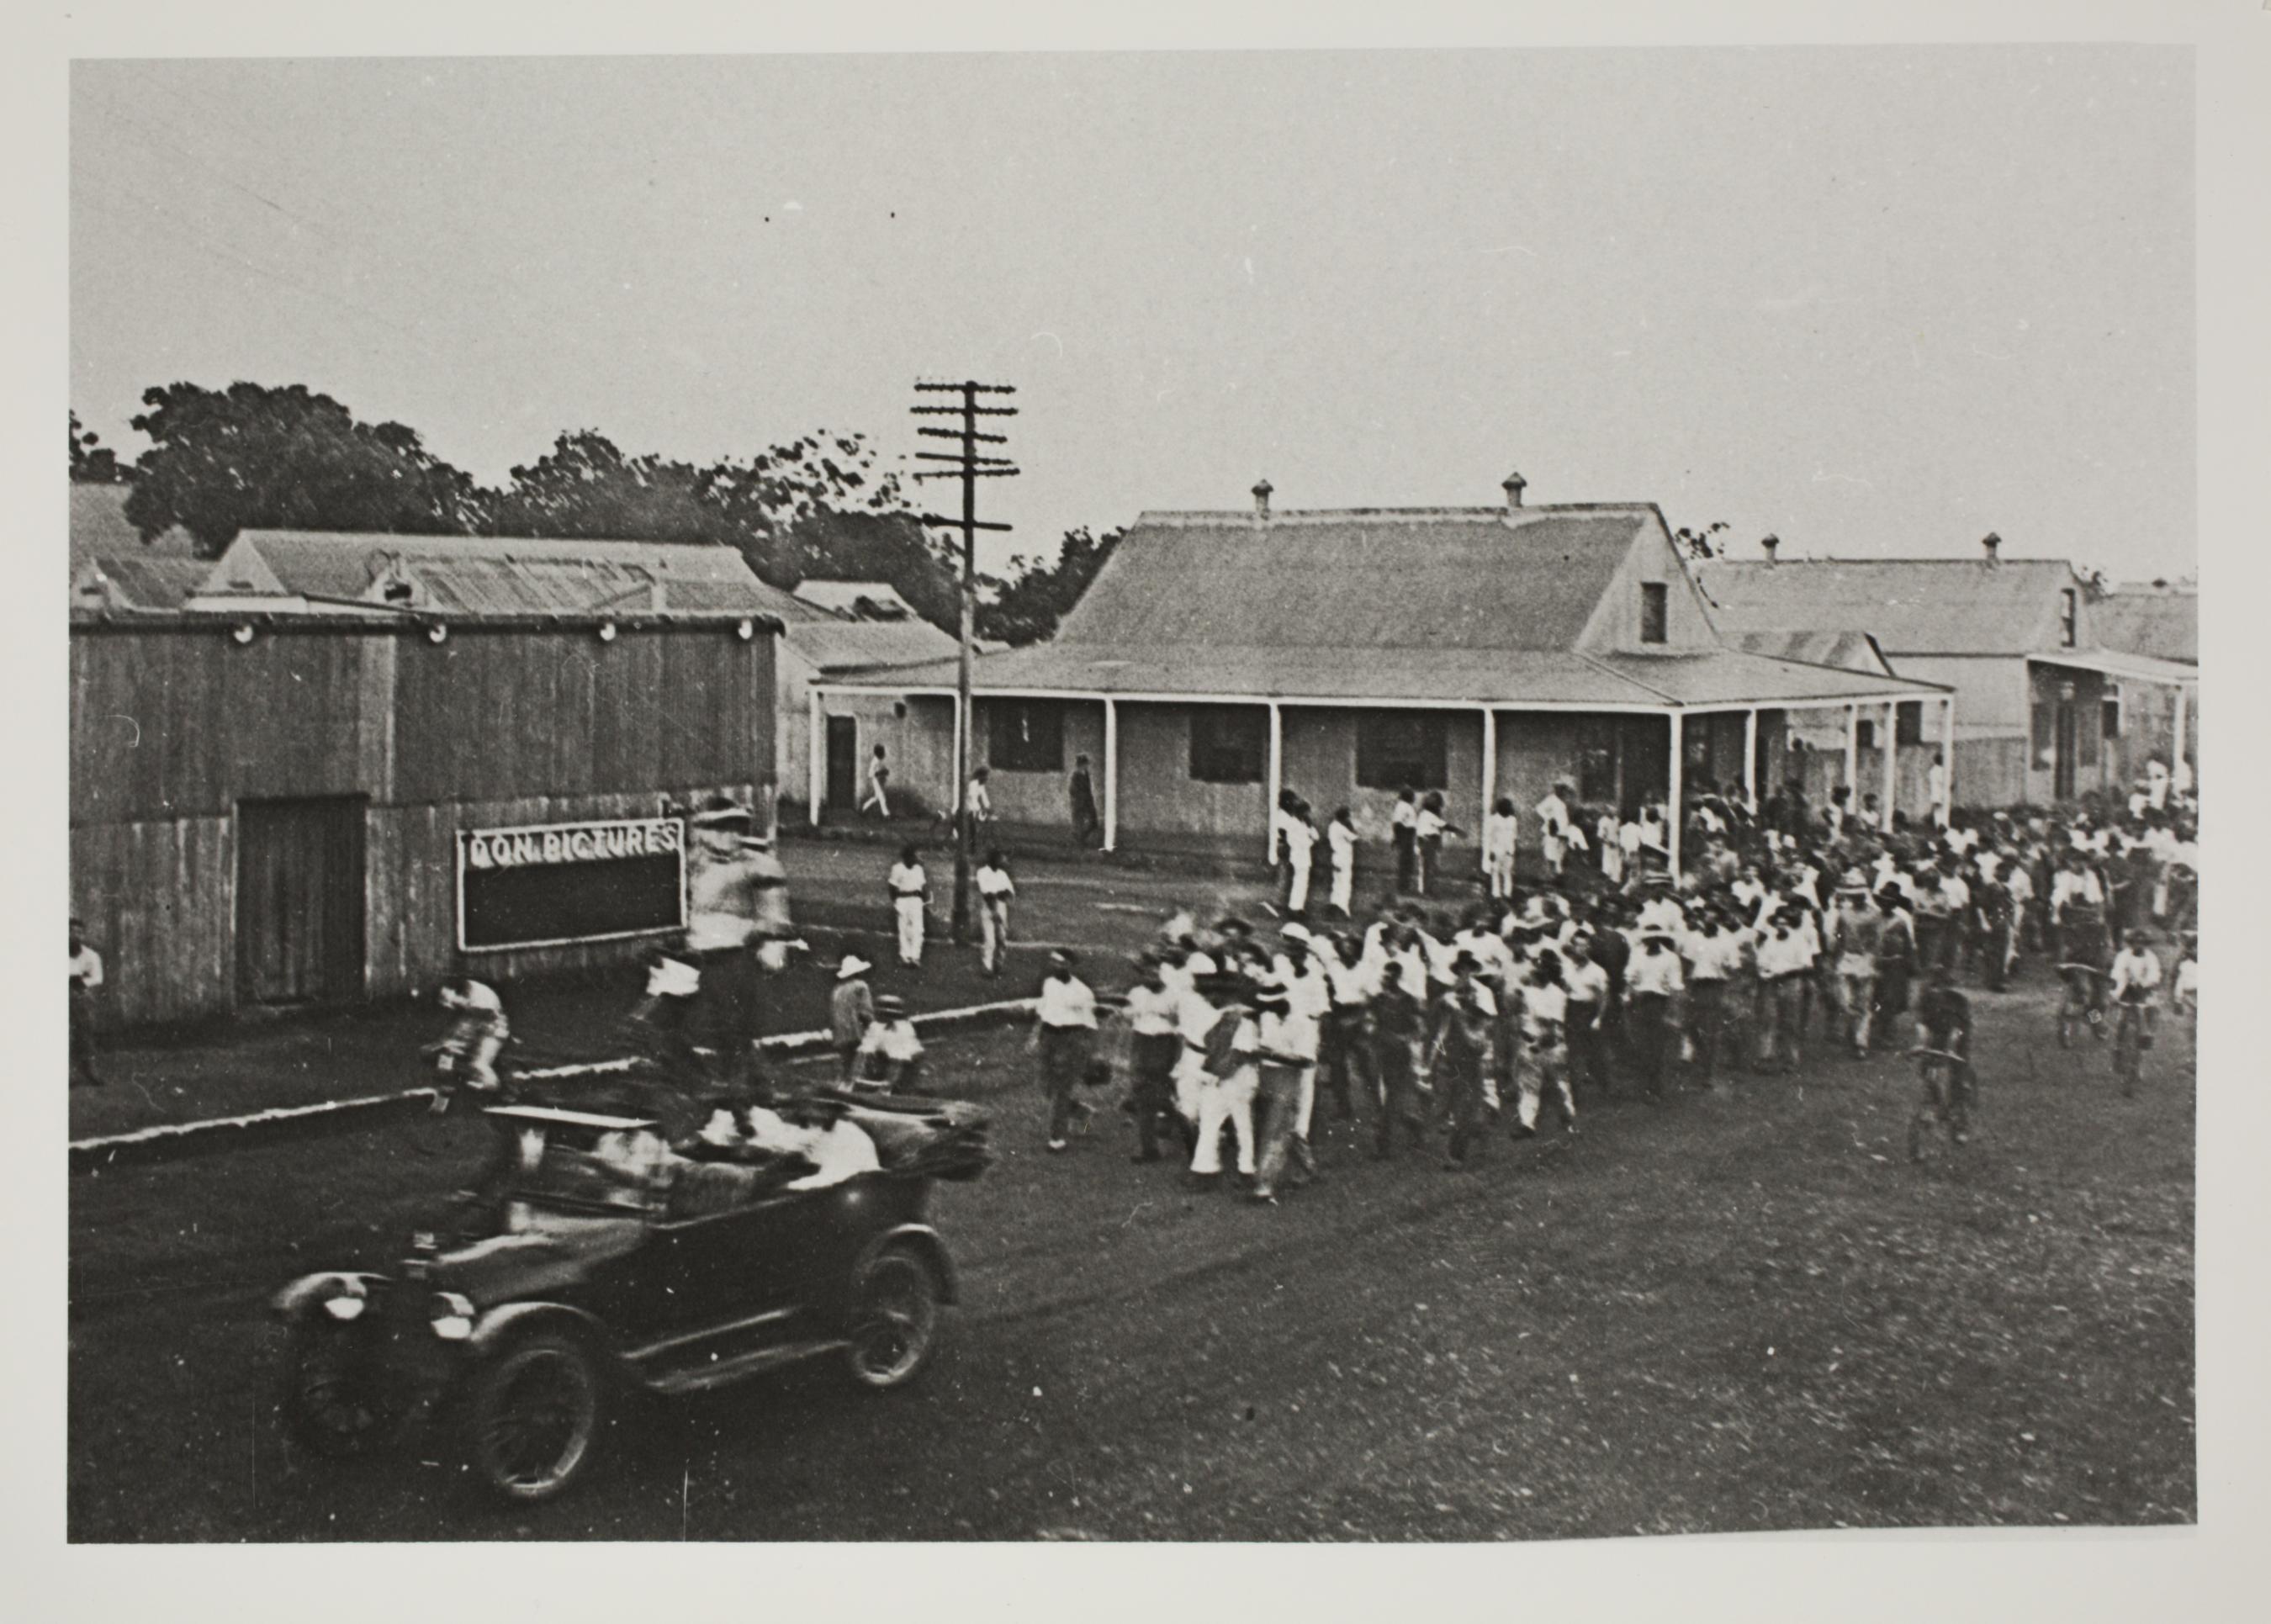 Black and white photo of a protest led by a motor vehicle and followed by a group of people in 1918